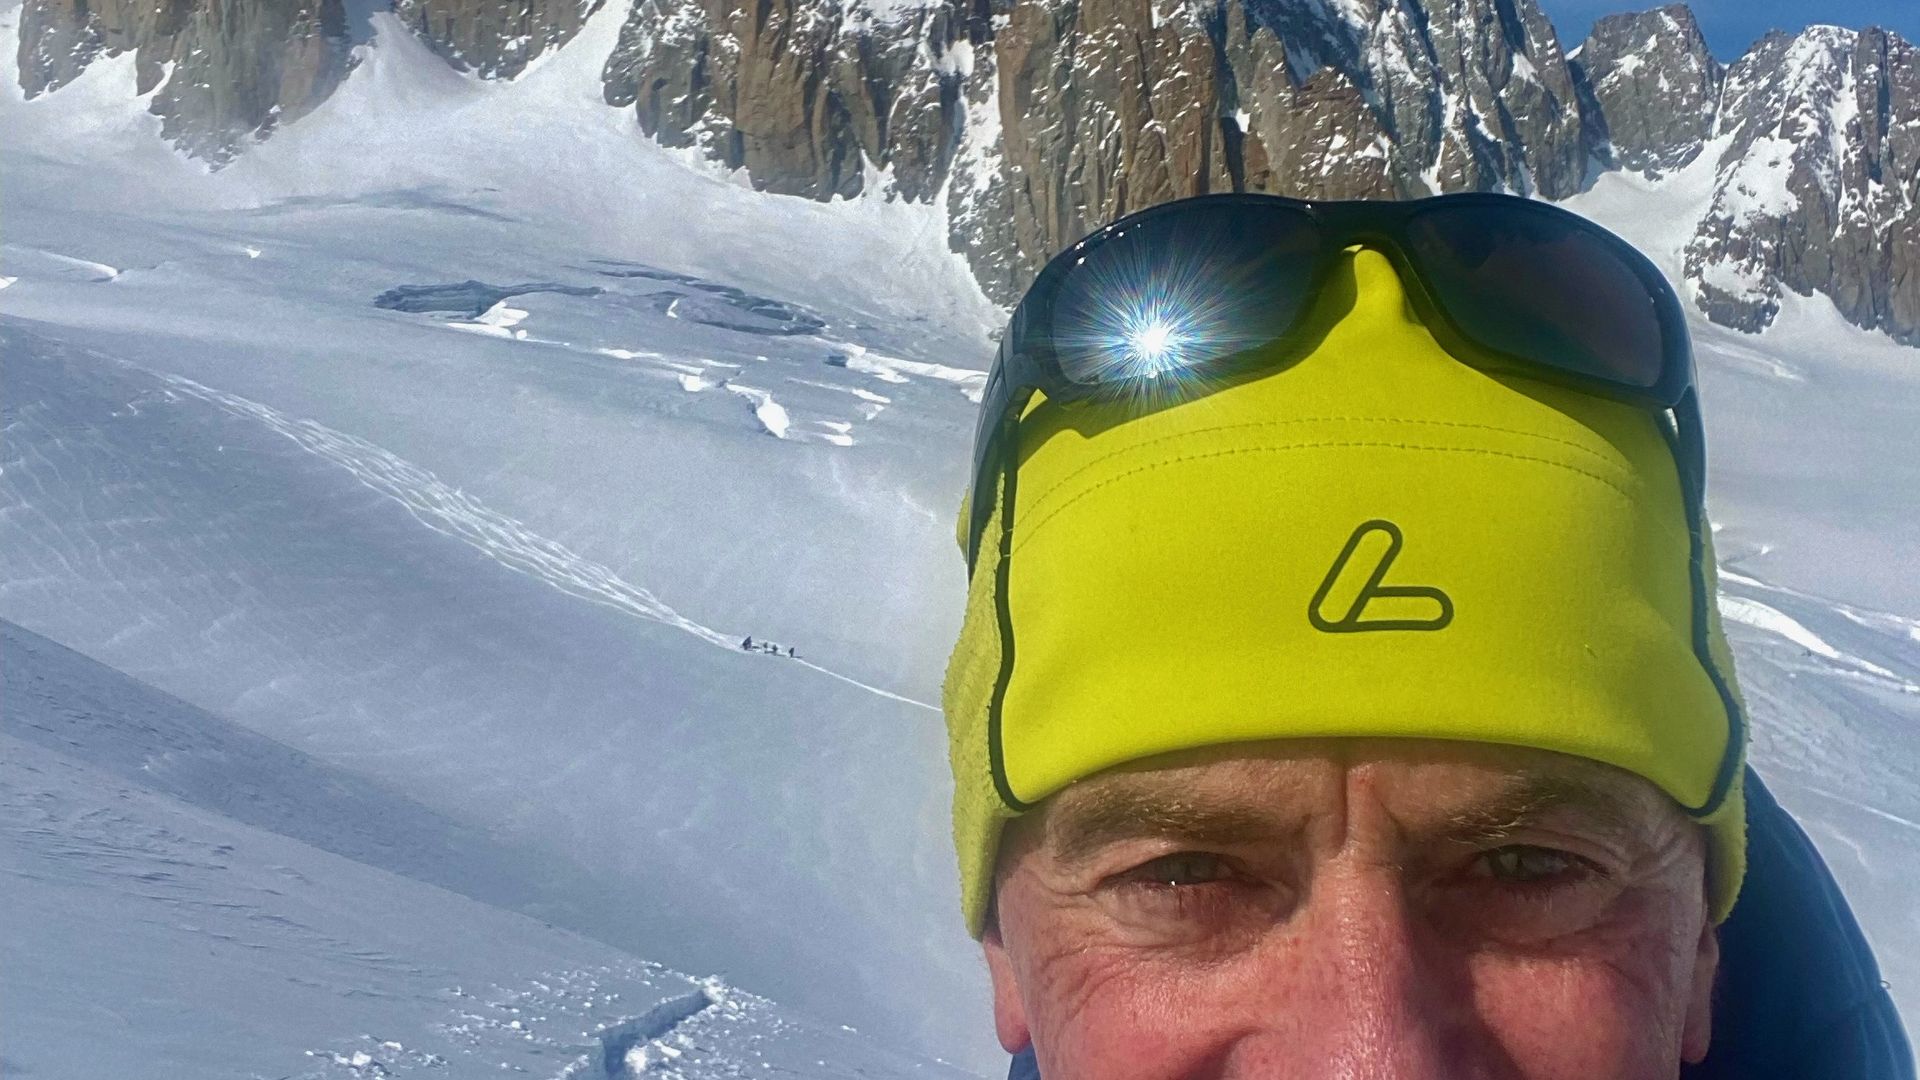 Peak performance is not a free lunch: Montblanc high altitude endurance training, March: